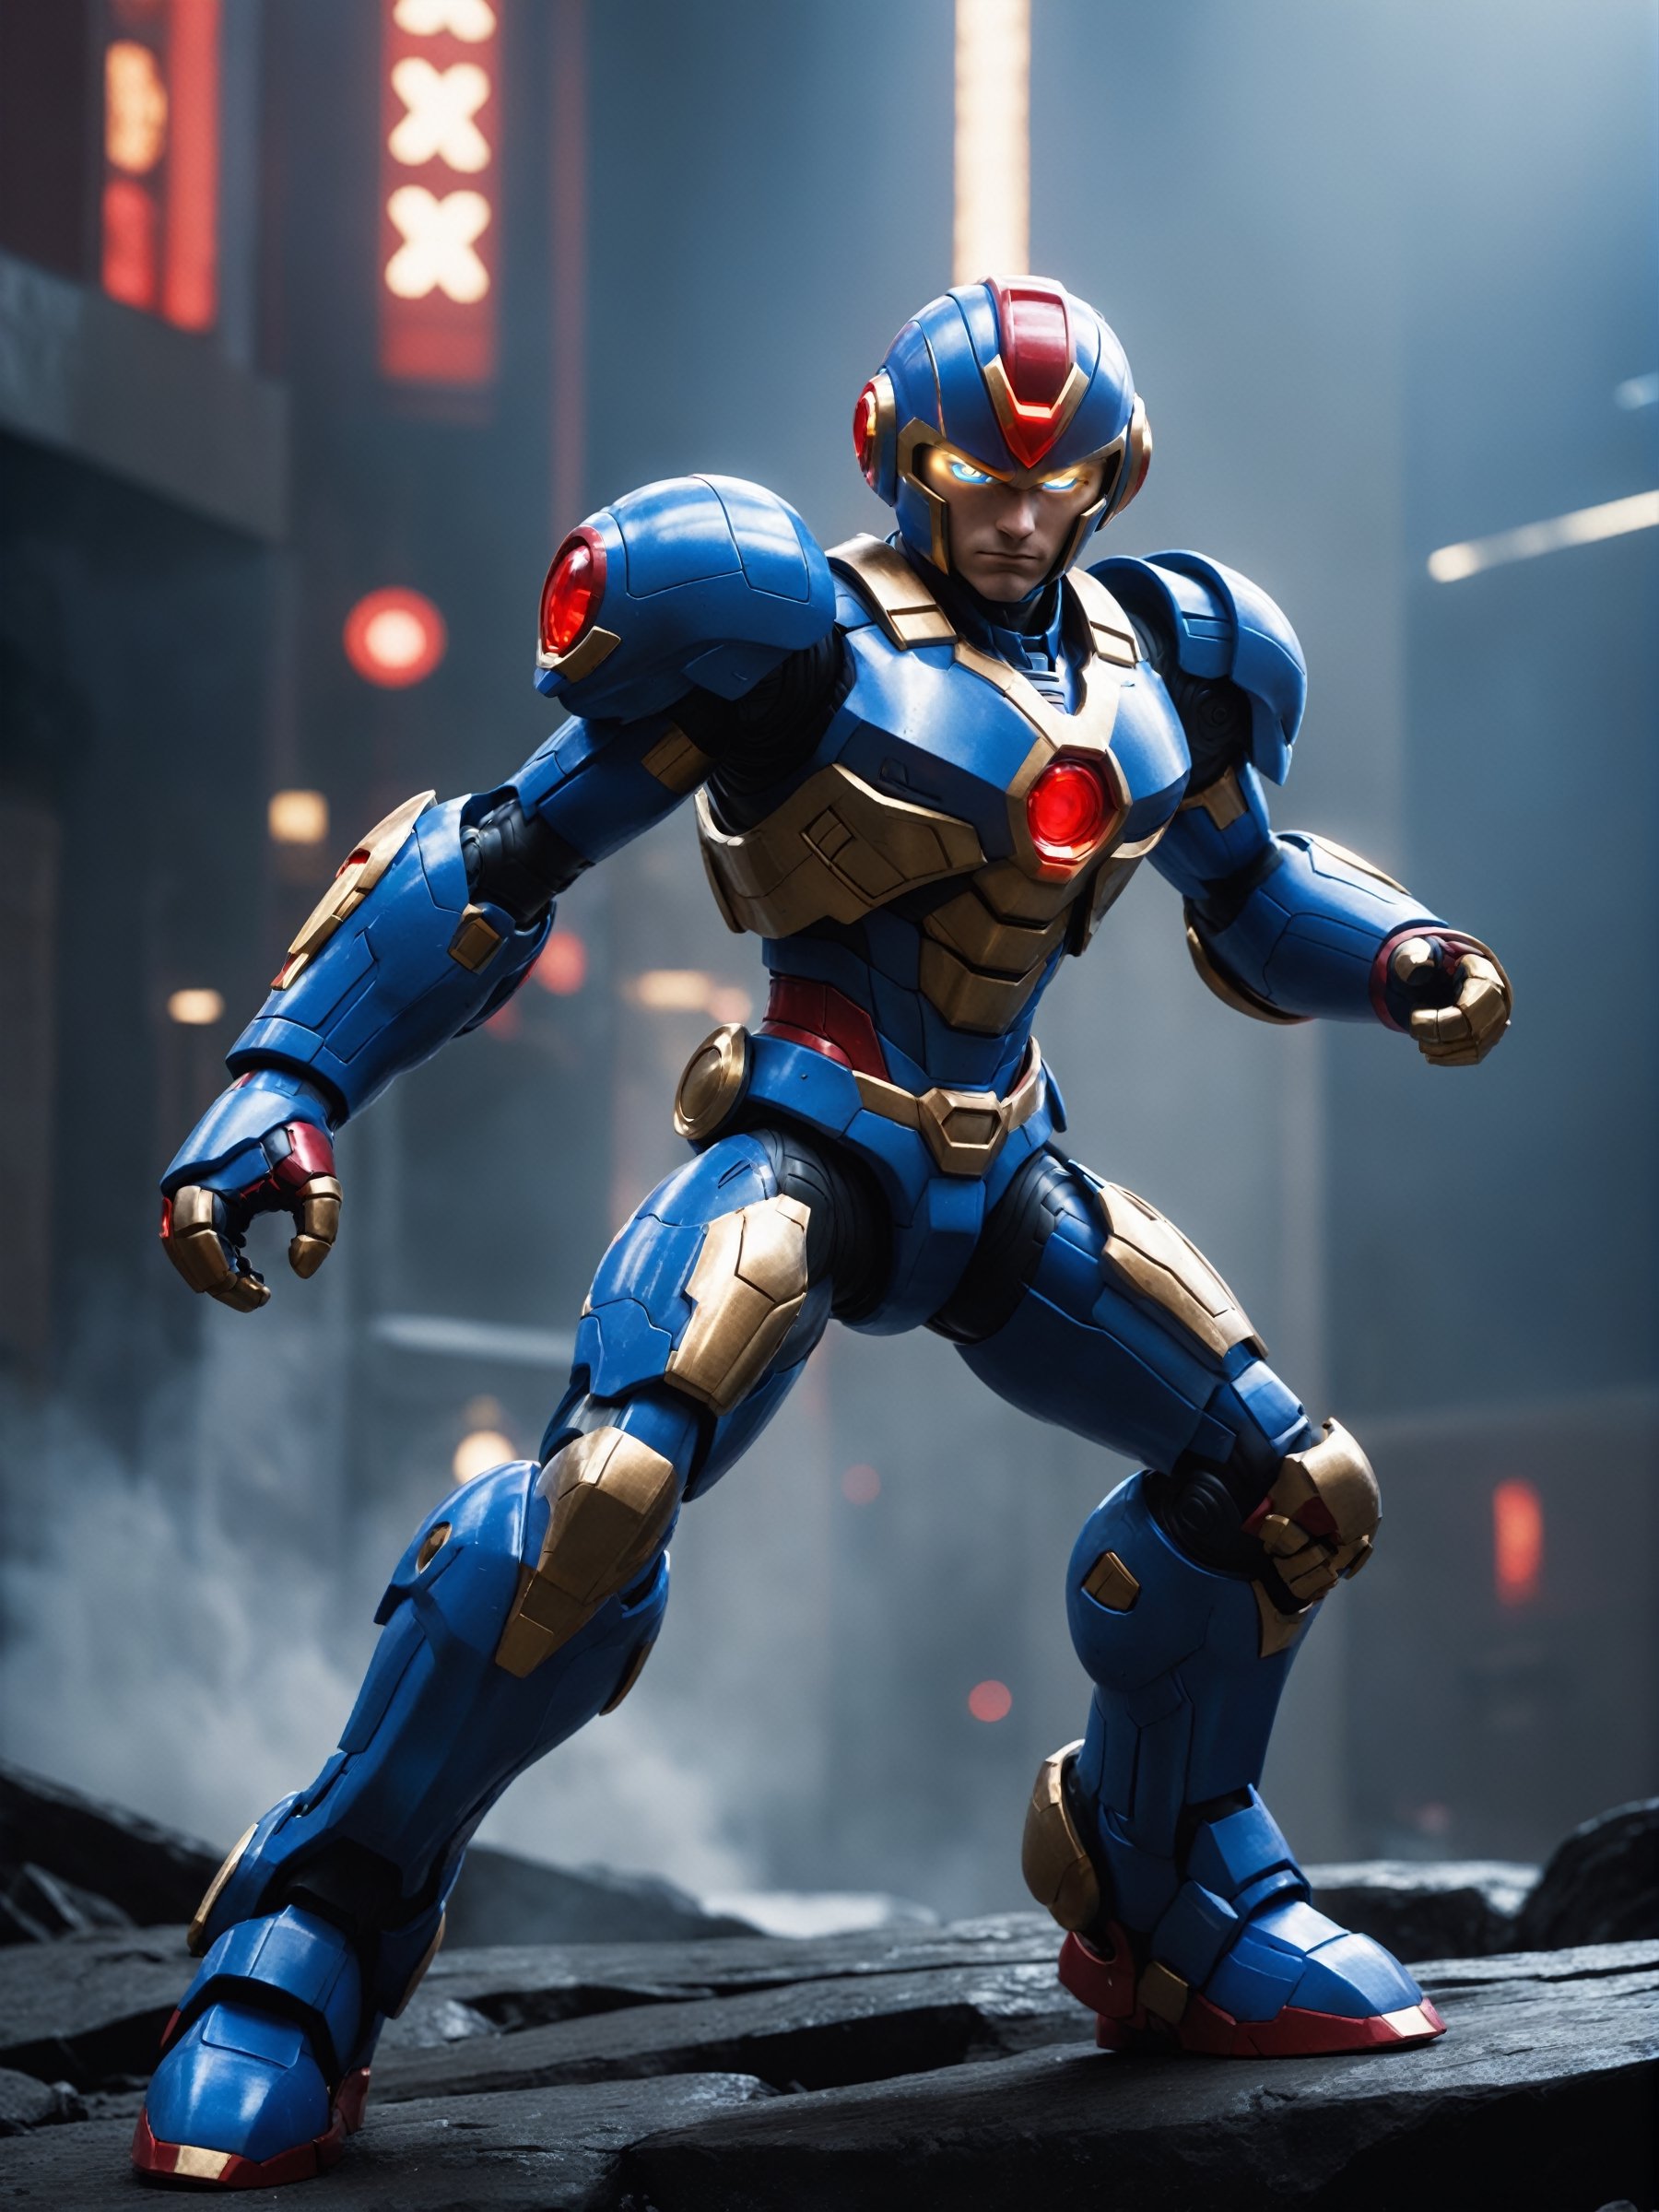 candid 16k photo of Mega Man X dashing in to save the day, his armor is blue and grey with red lights plus white and gold details dramatic lighting, cinematic colors, cinema quality, aw0k magnstyle